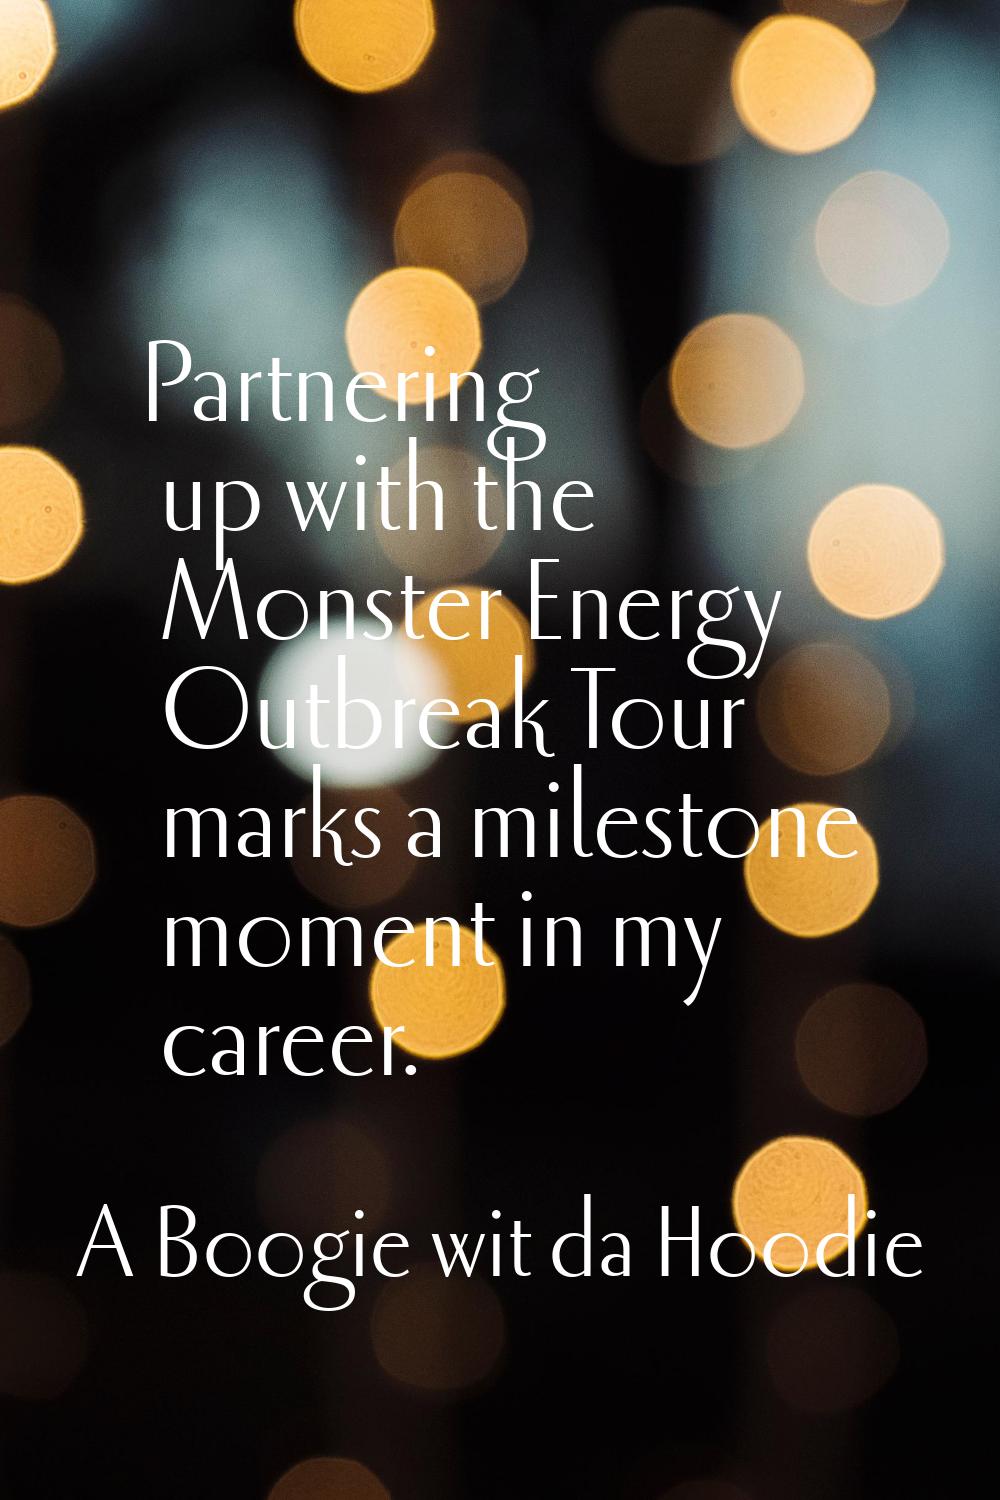 Partnering up with the Monster Energy Outbreak Tour marks a milestone moment in my career.